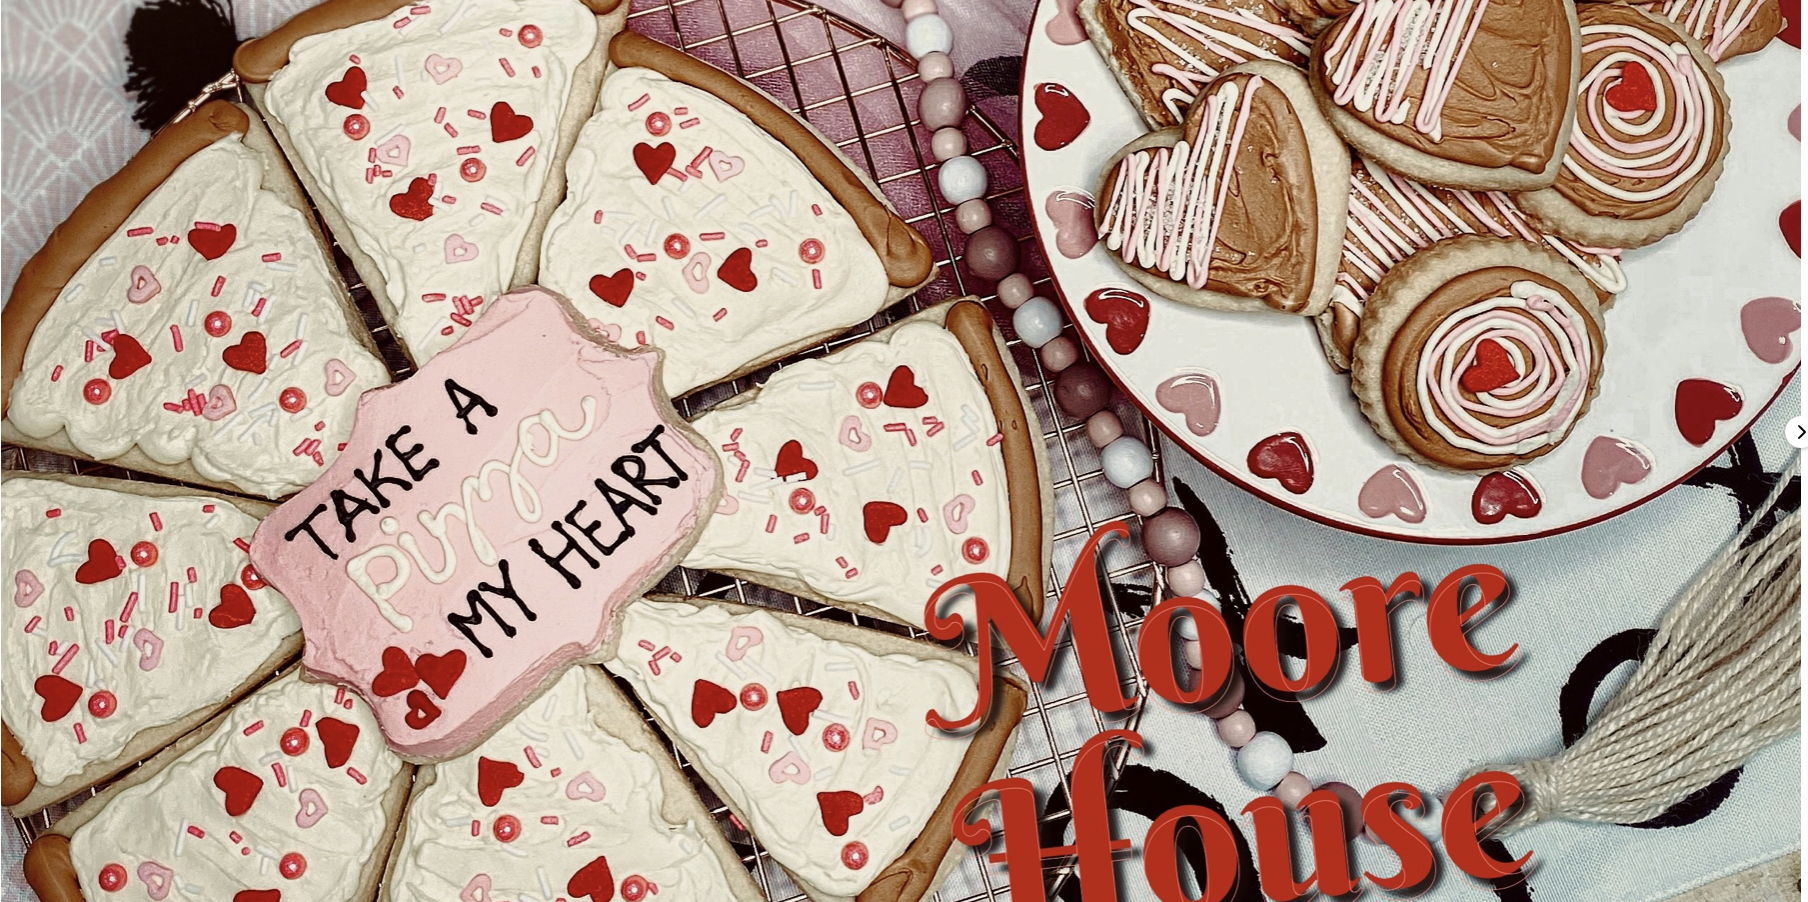 Cookie Decorating with Moore House promotional image